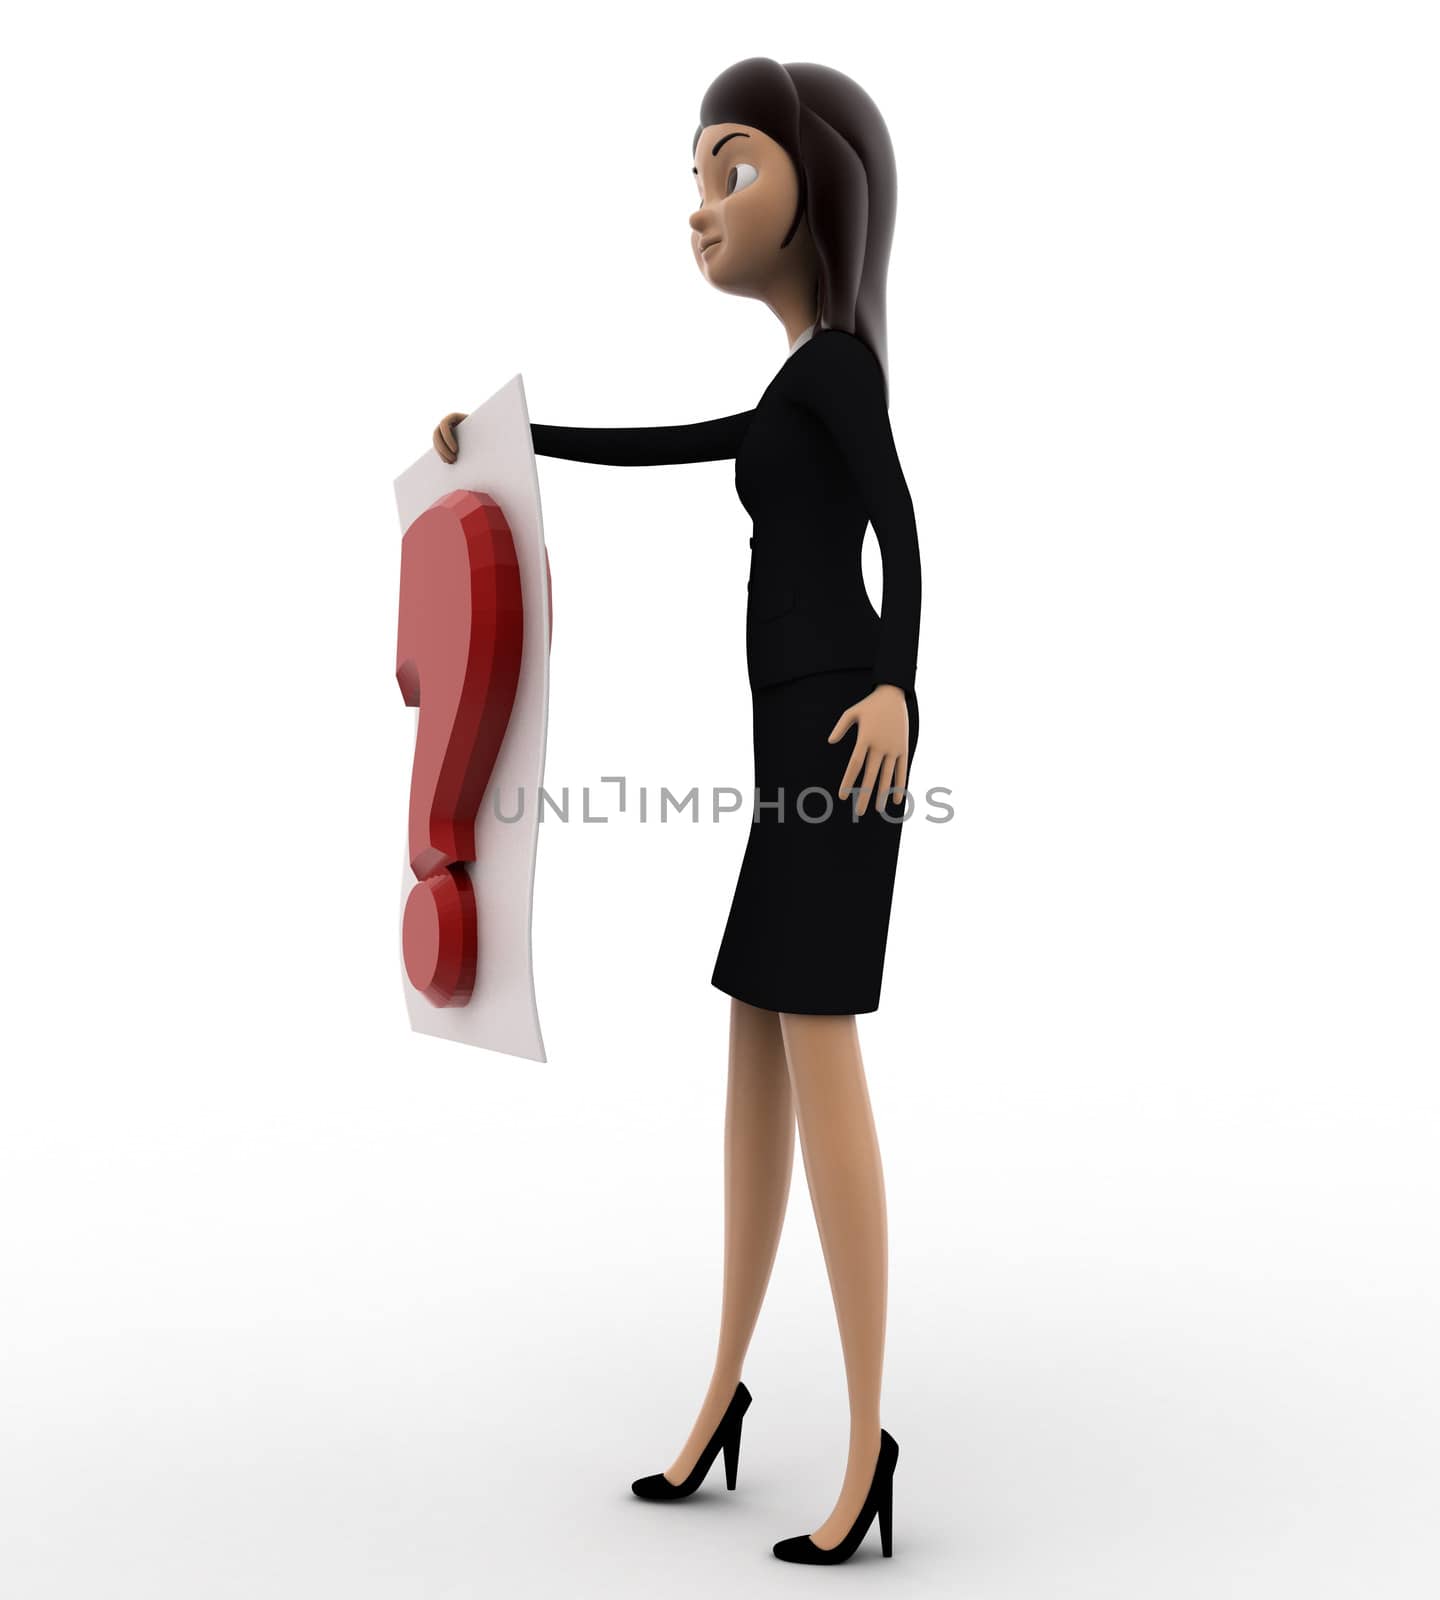 3d woman with question mark board concept by touchmenithin@gmail.com